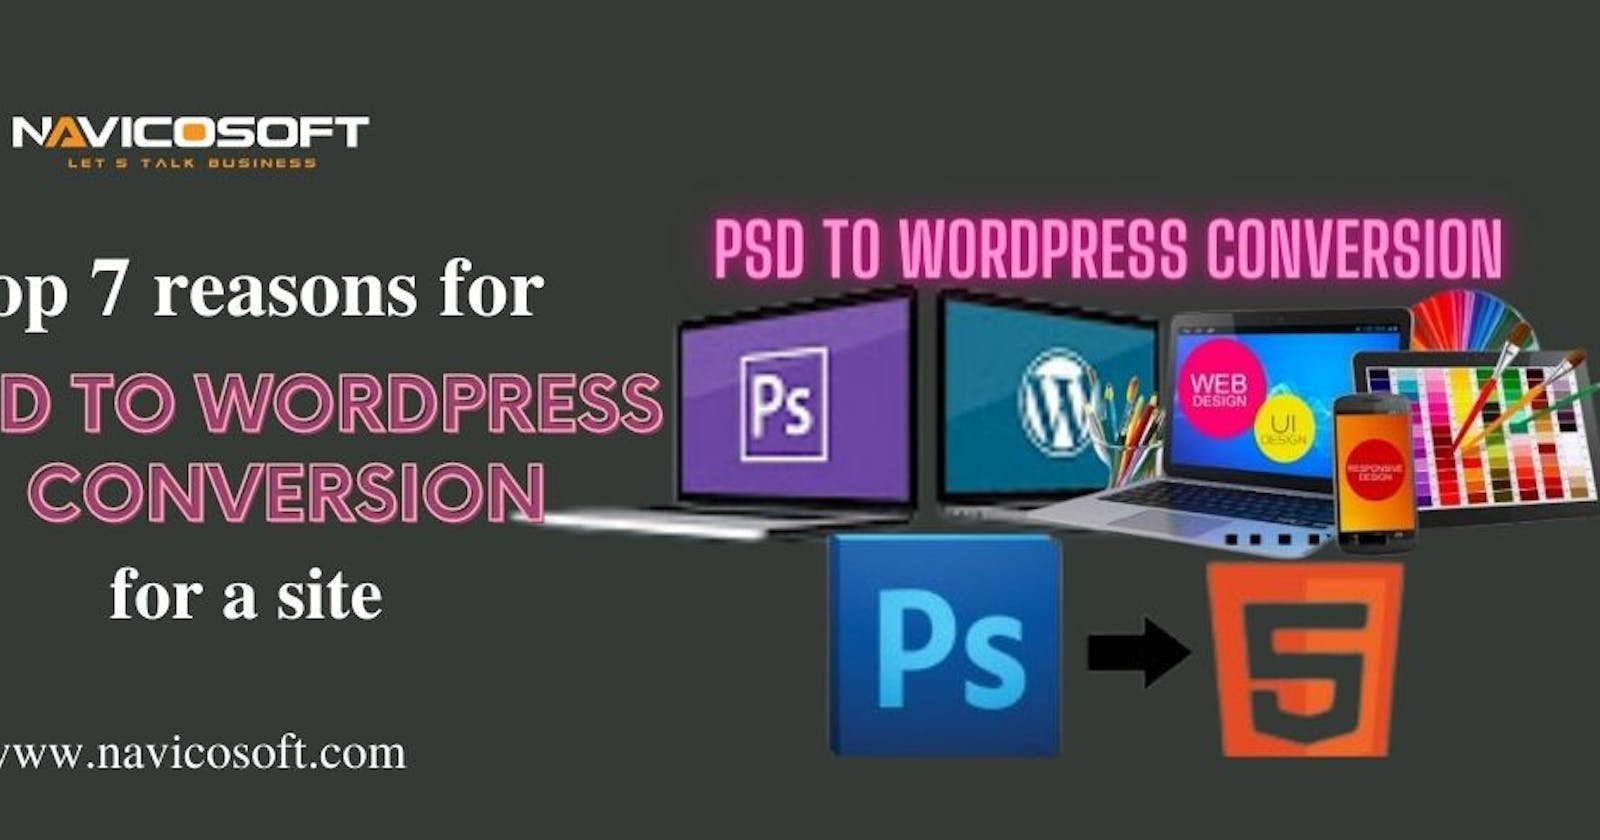 Top 7 reasons for PSD to WordPress conversion for a site